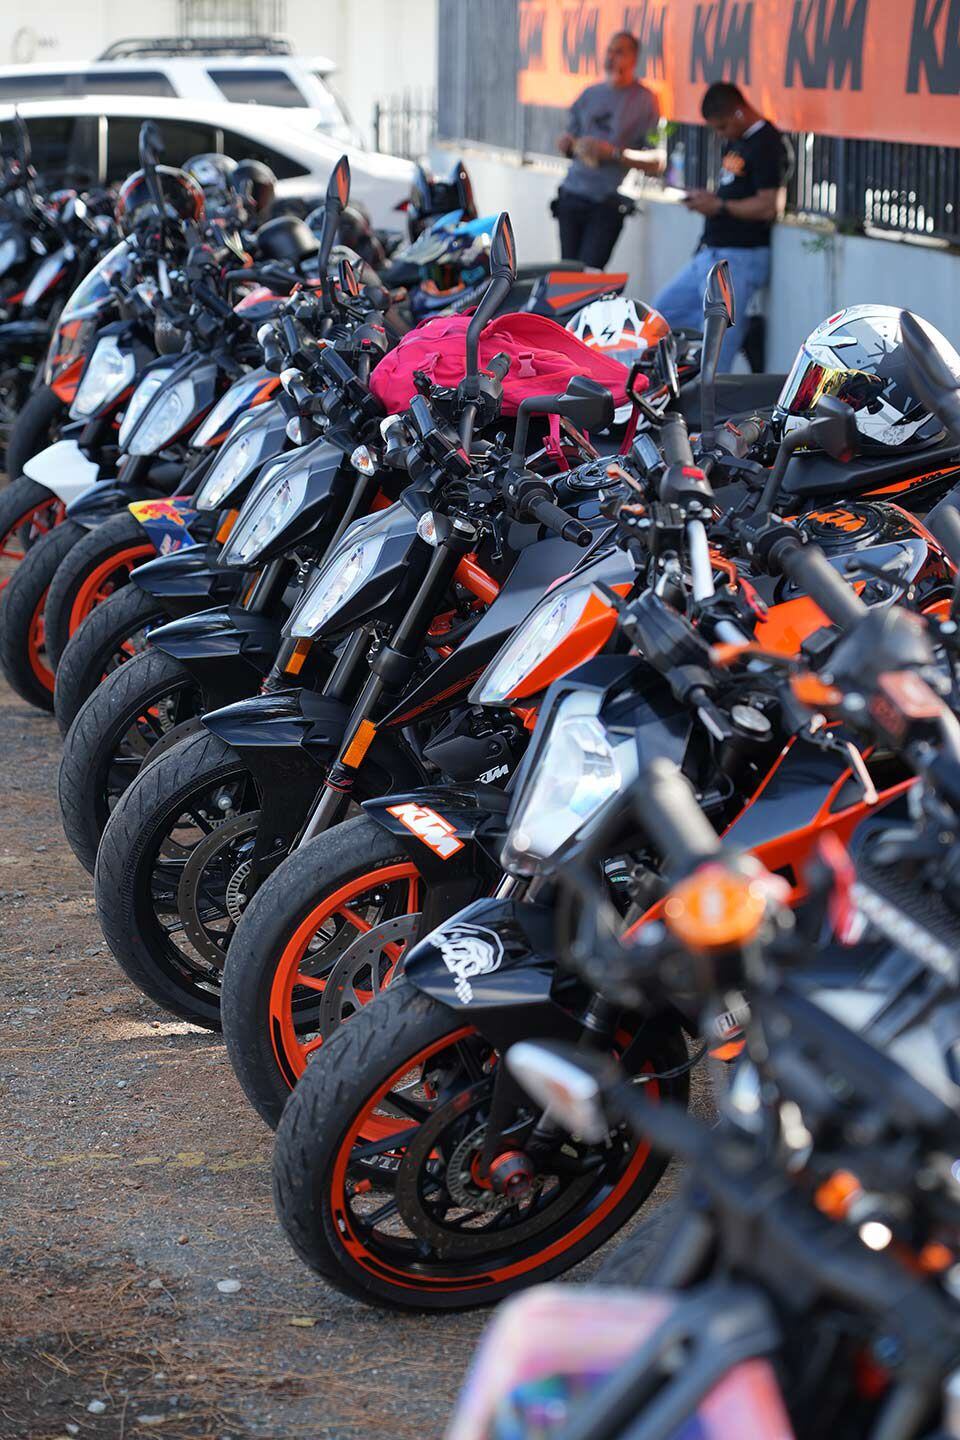 Puerto Rican motorcyclists love their KTM Duke streetbikes. It’s easily one of the more popular bike brands in the Caribbean island.